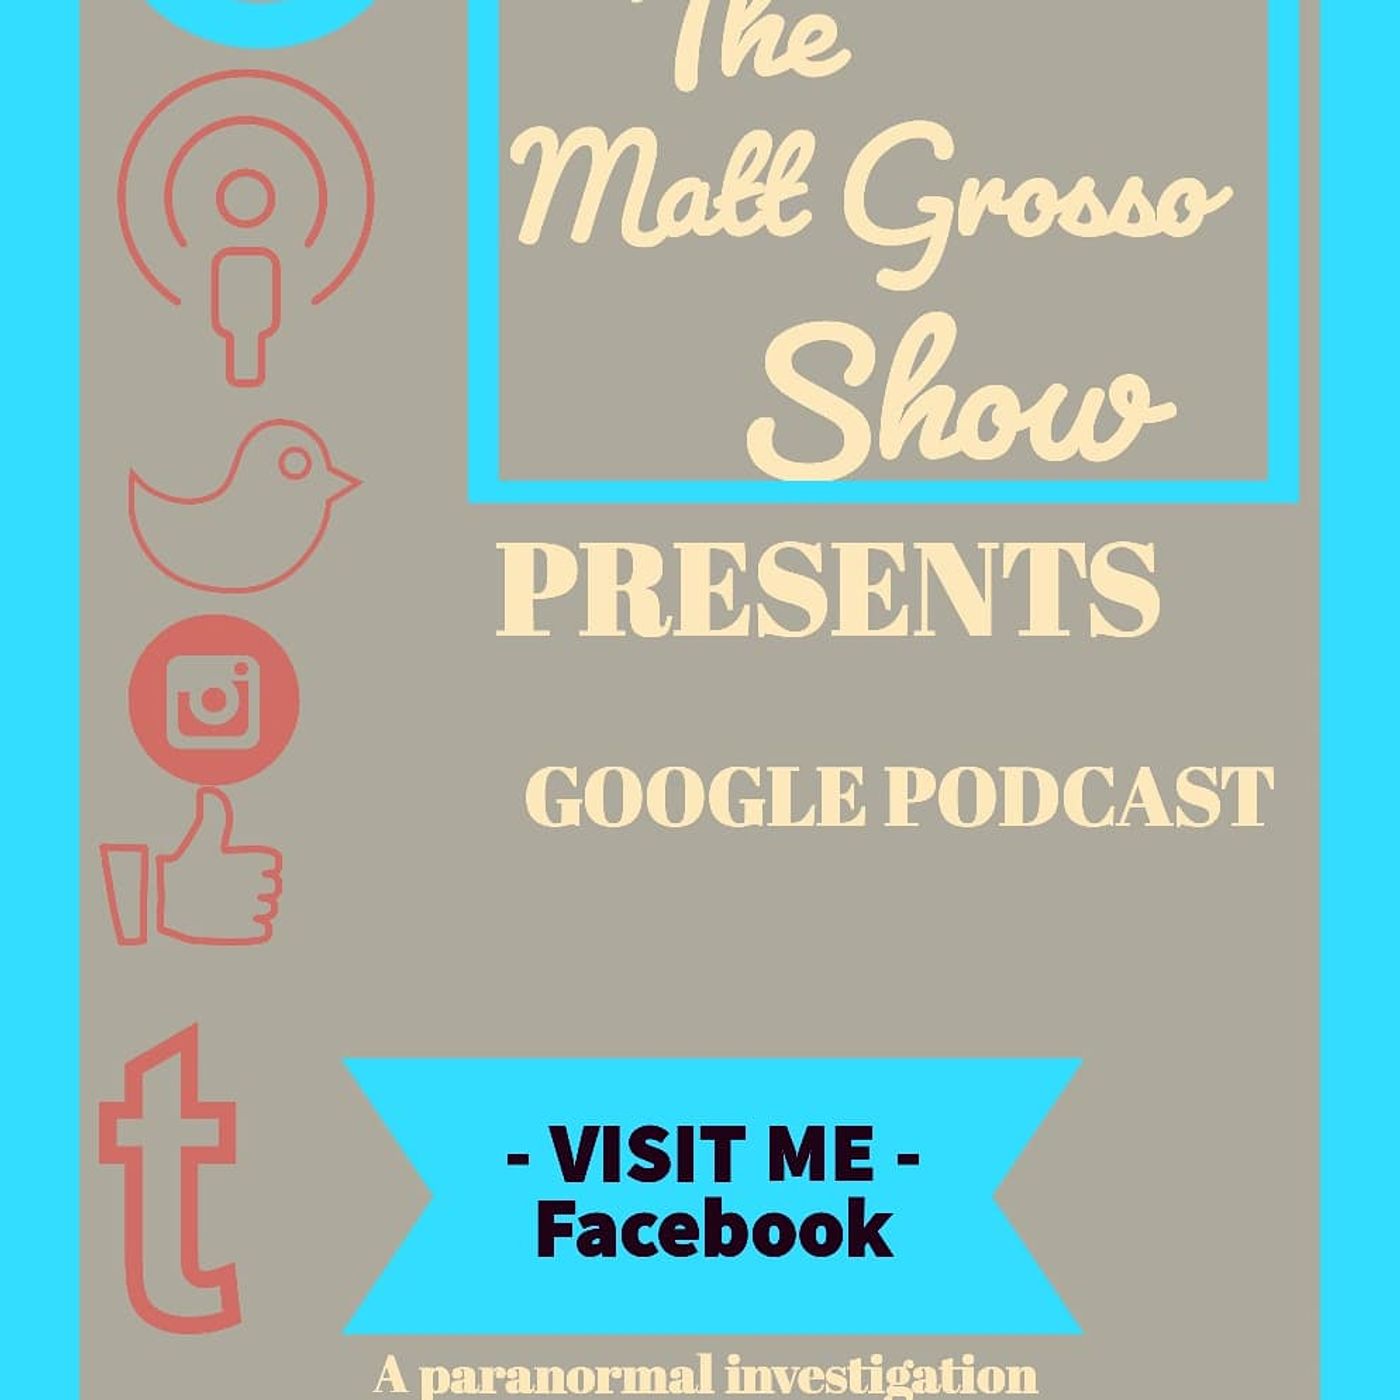 The Matt Grosso Experience MGE